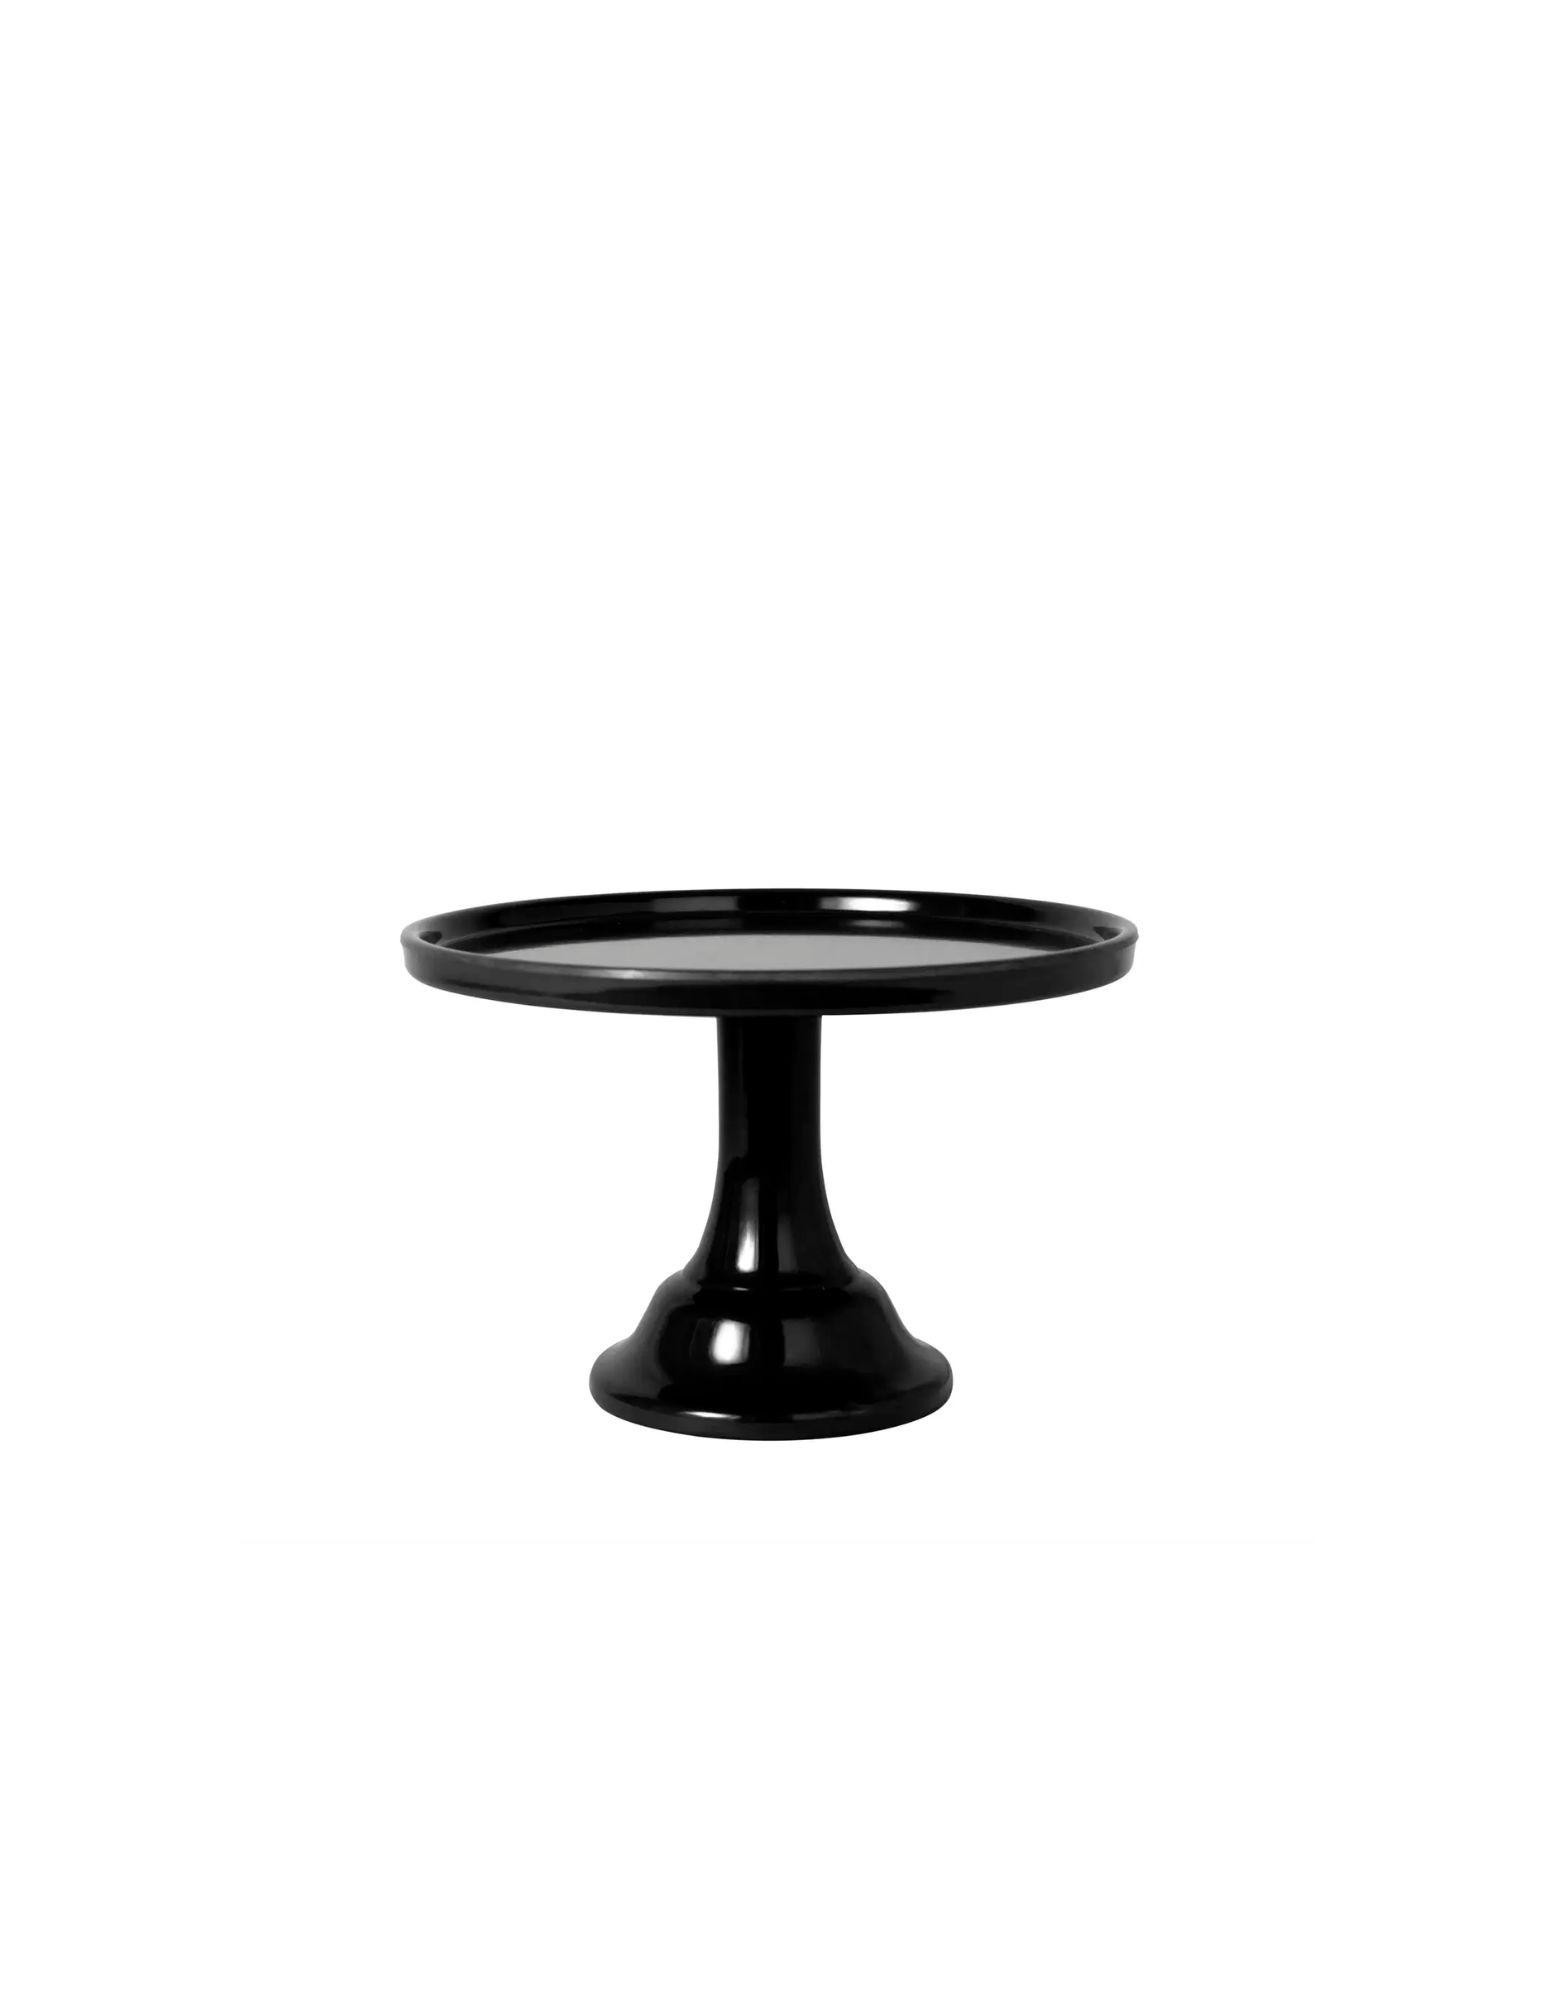 Melamine Cake Stand Small- Ink Black 8.5 inch